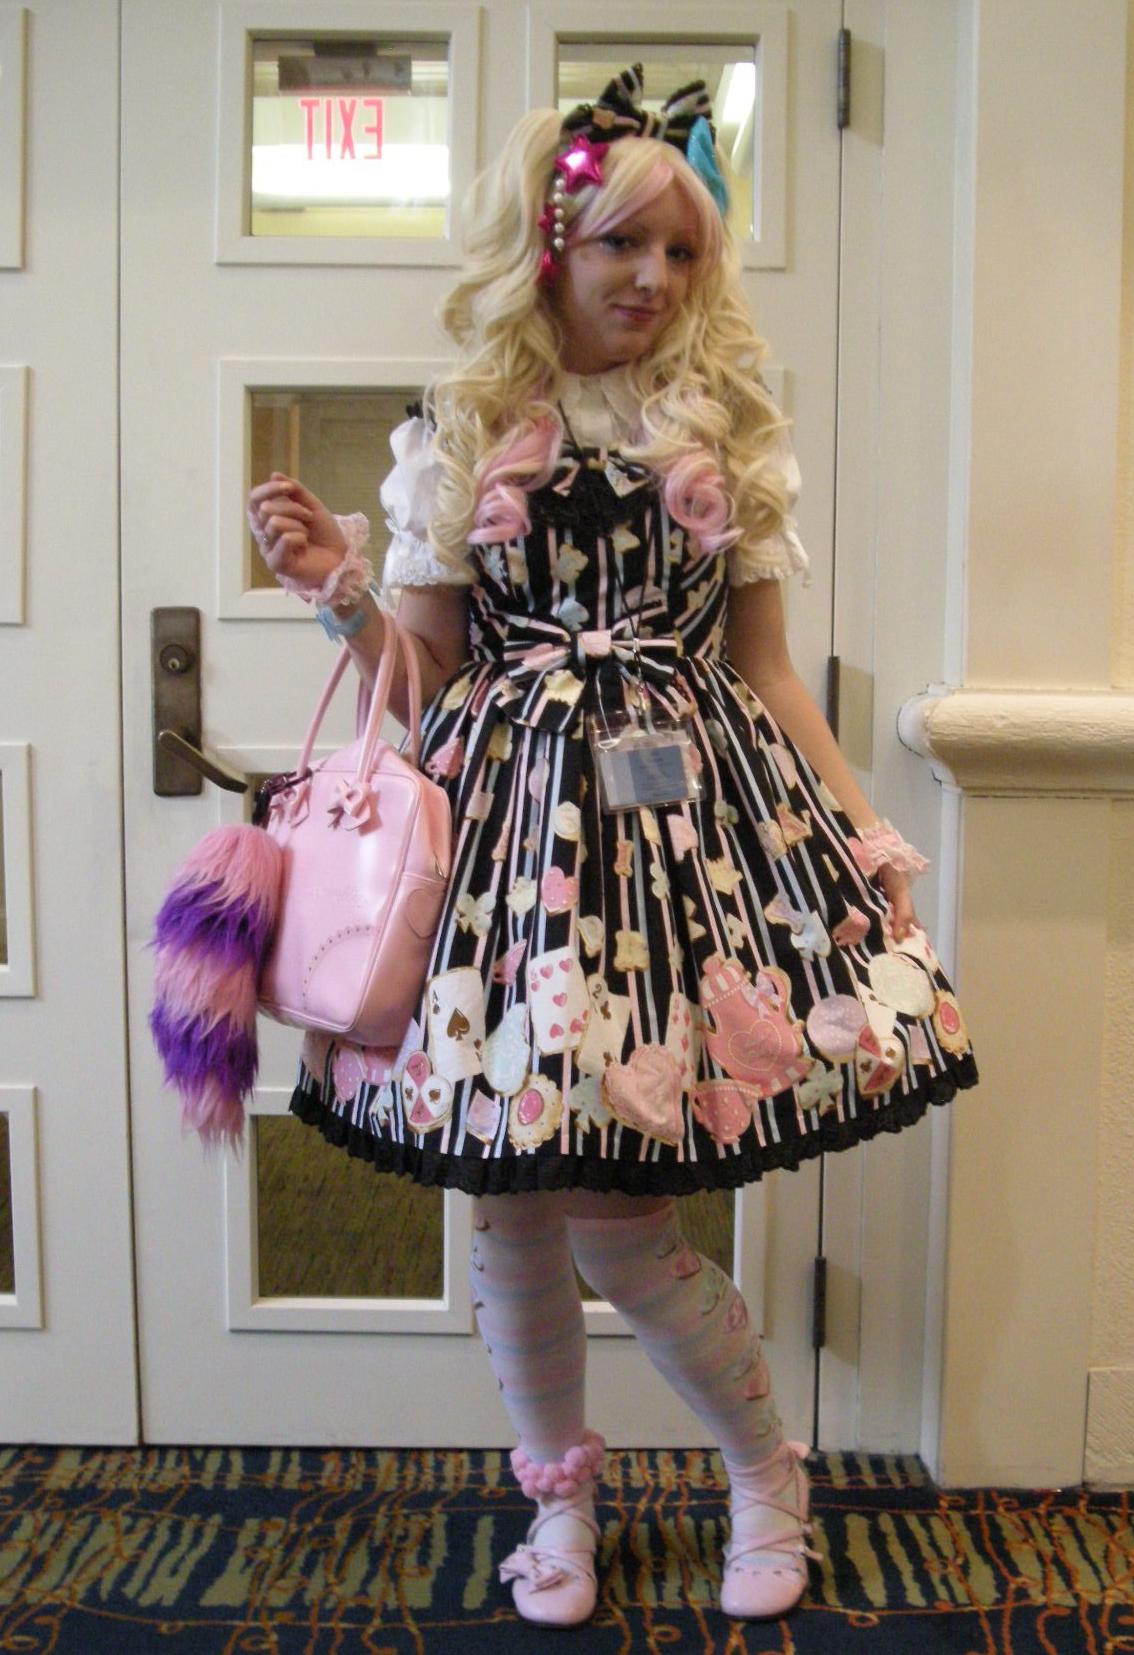 Blonde Lolita wearing White Opaque Stockings and Colored Short Dress